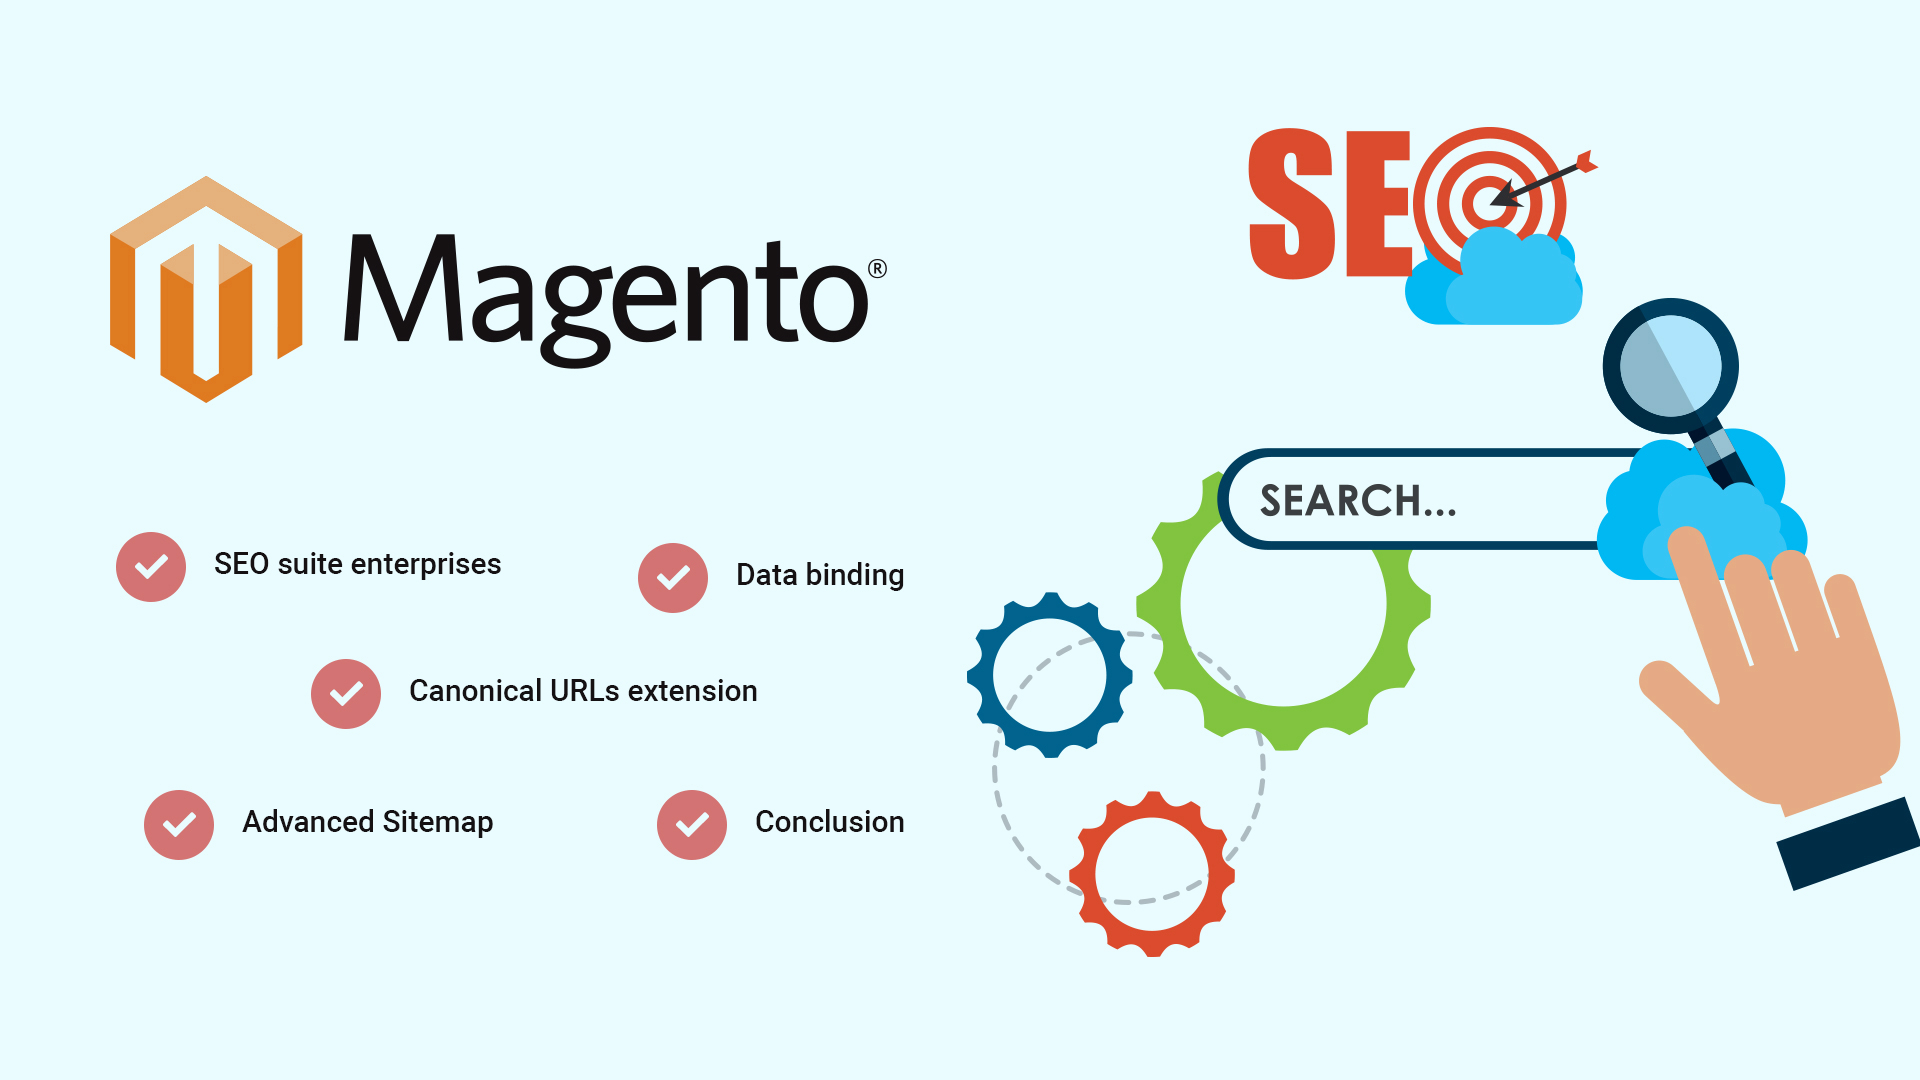 How Magento Extensions Can Uplift The SEO Score Of The Ecommerce Store